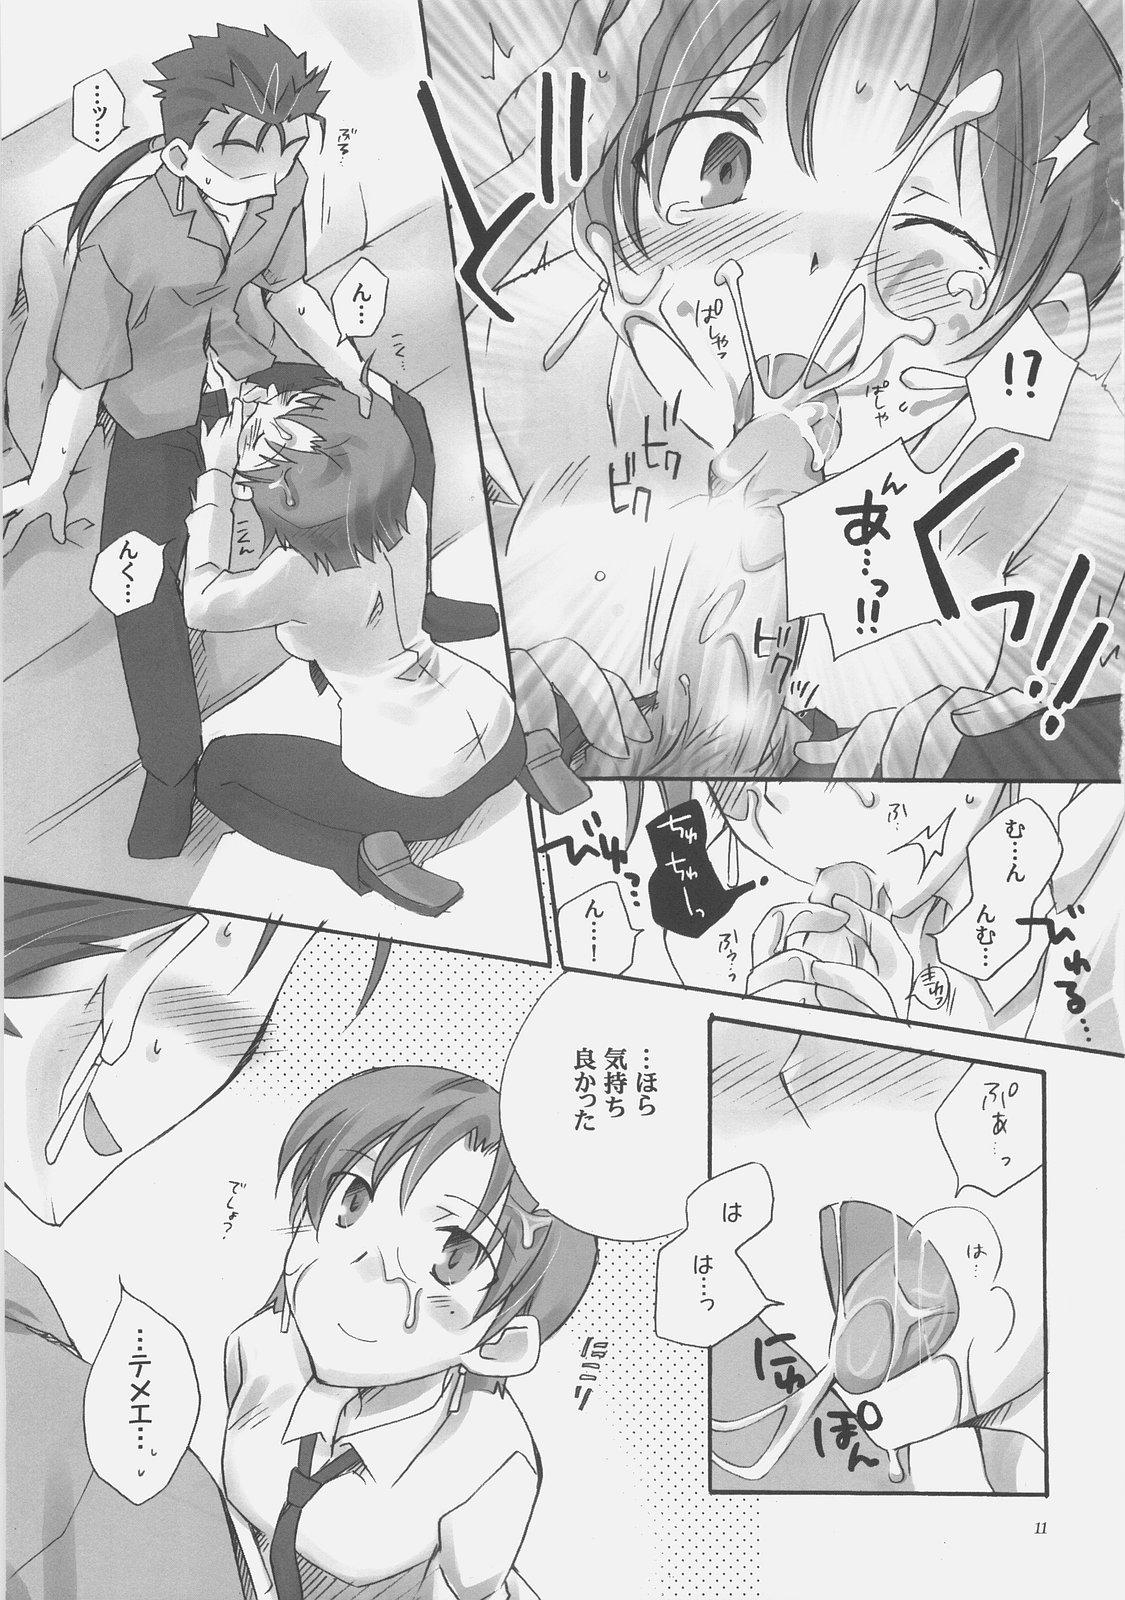 Girl Sucking Dick Secret Mission - Fate hollow ataraxia Gay Averagedick - Page 9